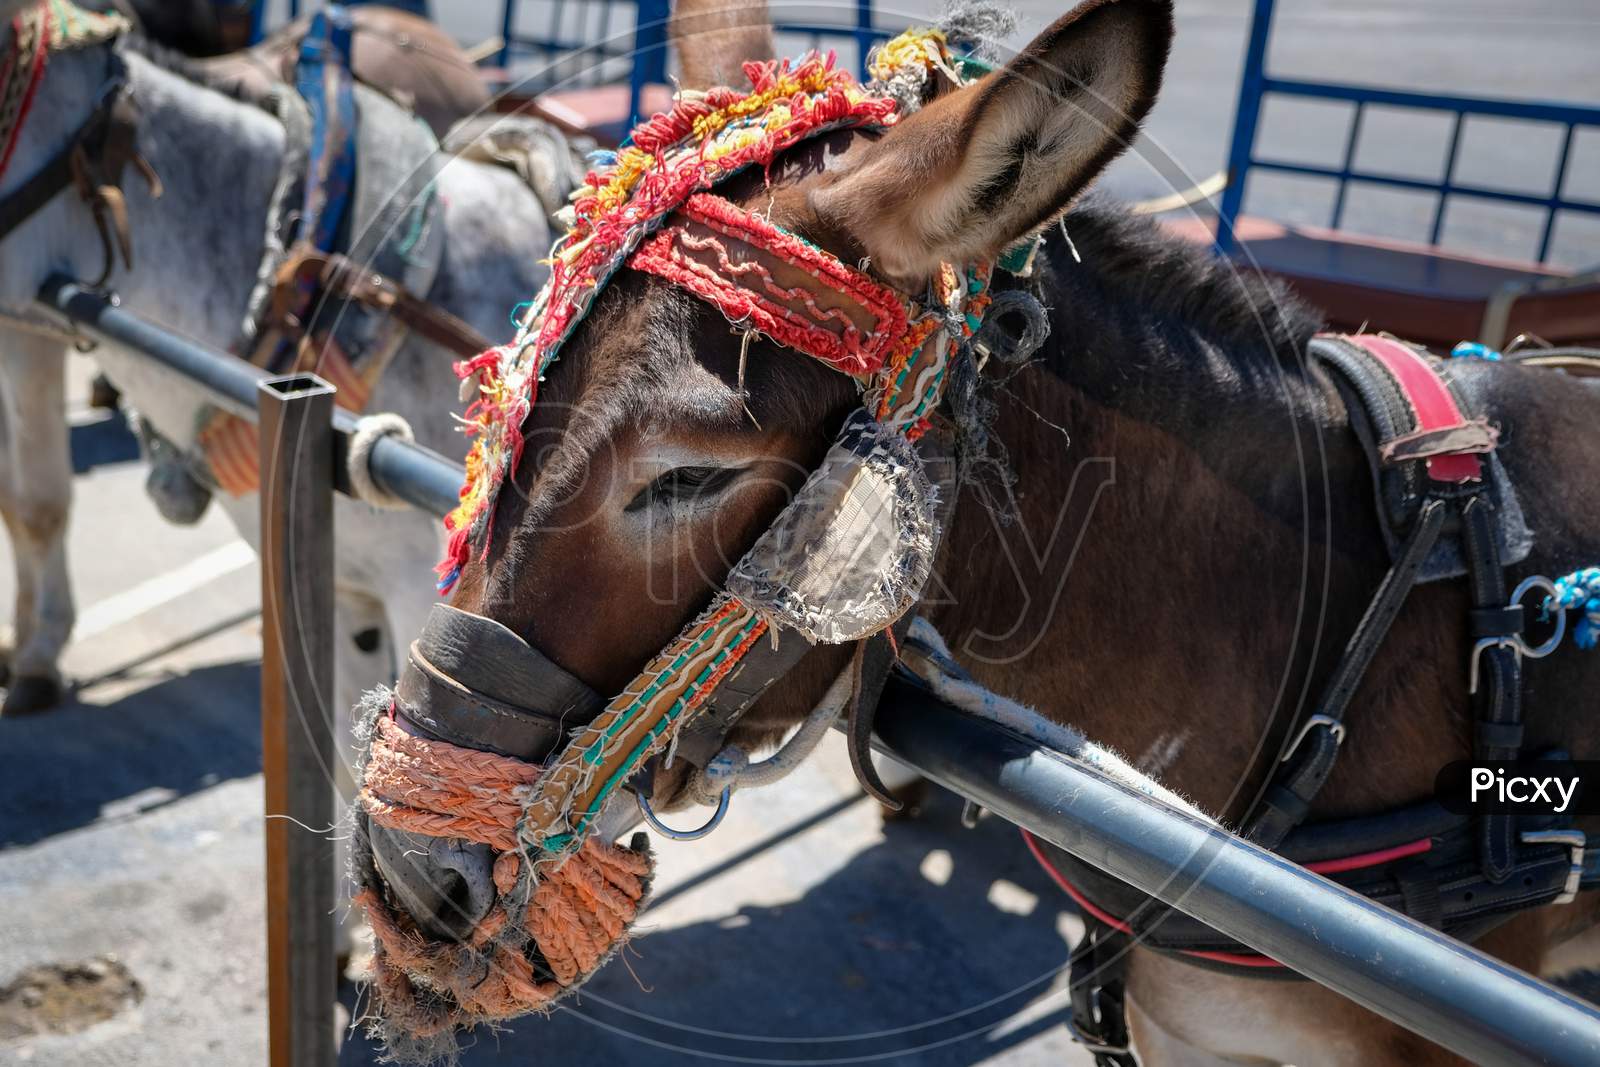 Mijas, Andalucia/Spain - July 3 : Donkey Taxi In Mijas Andalucía Spain On July 3, 2017